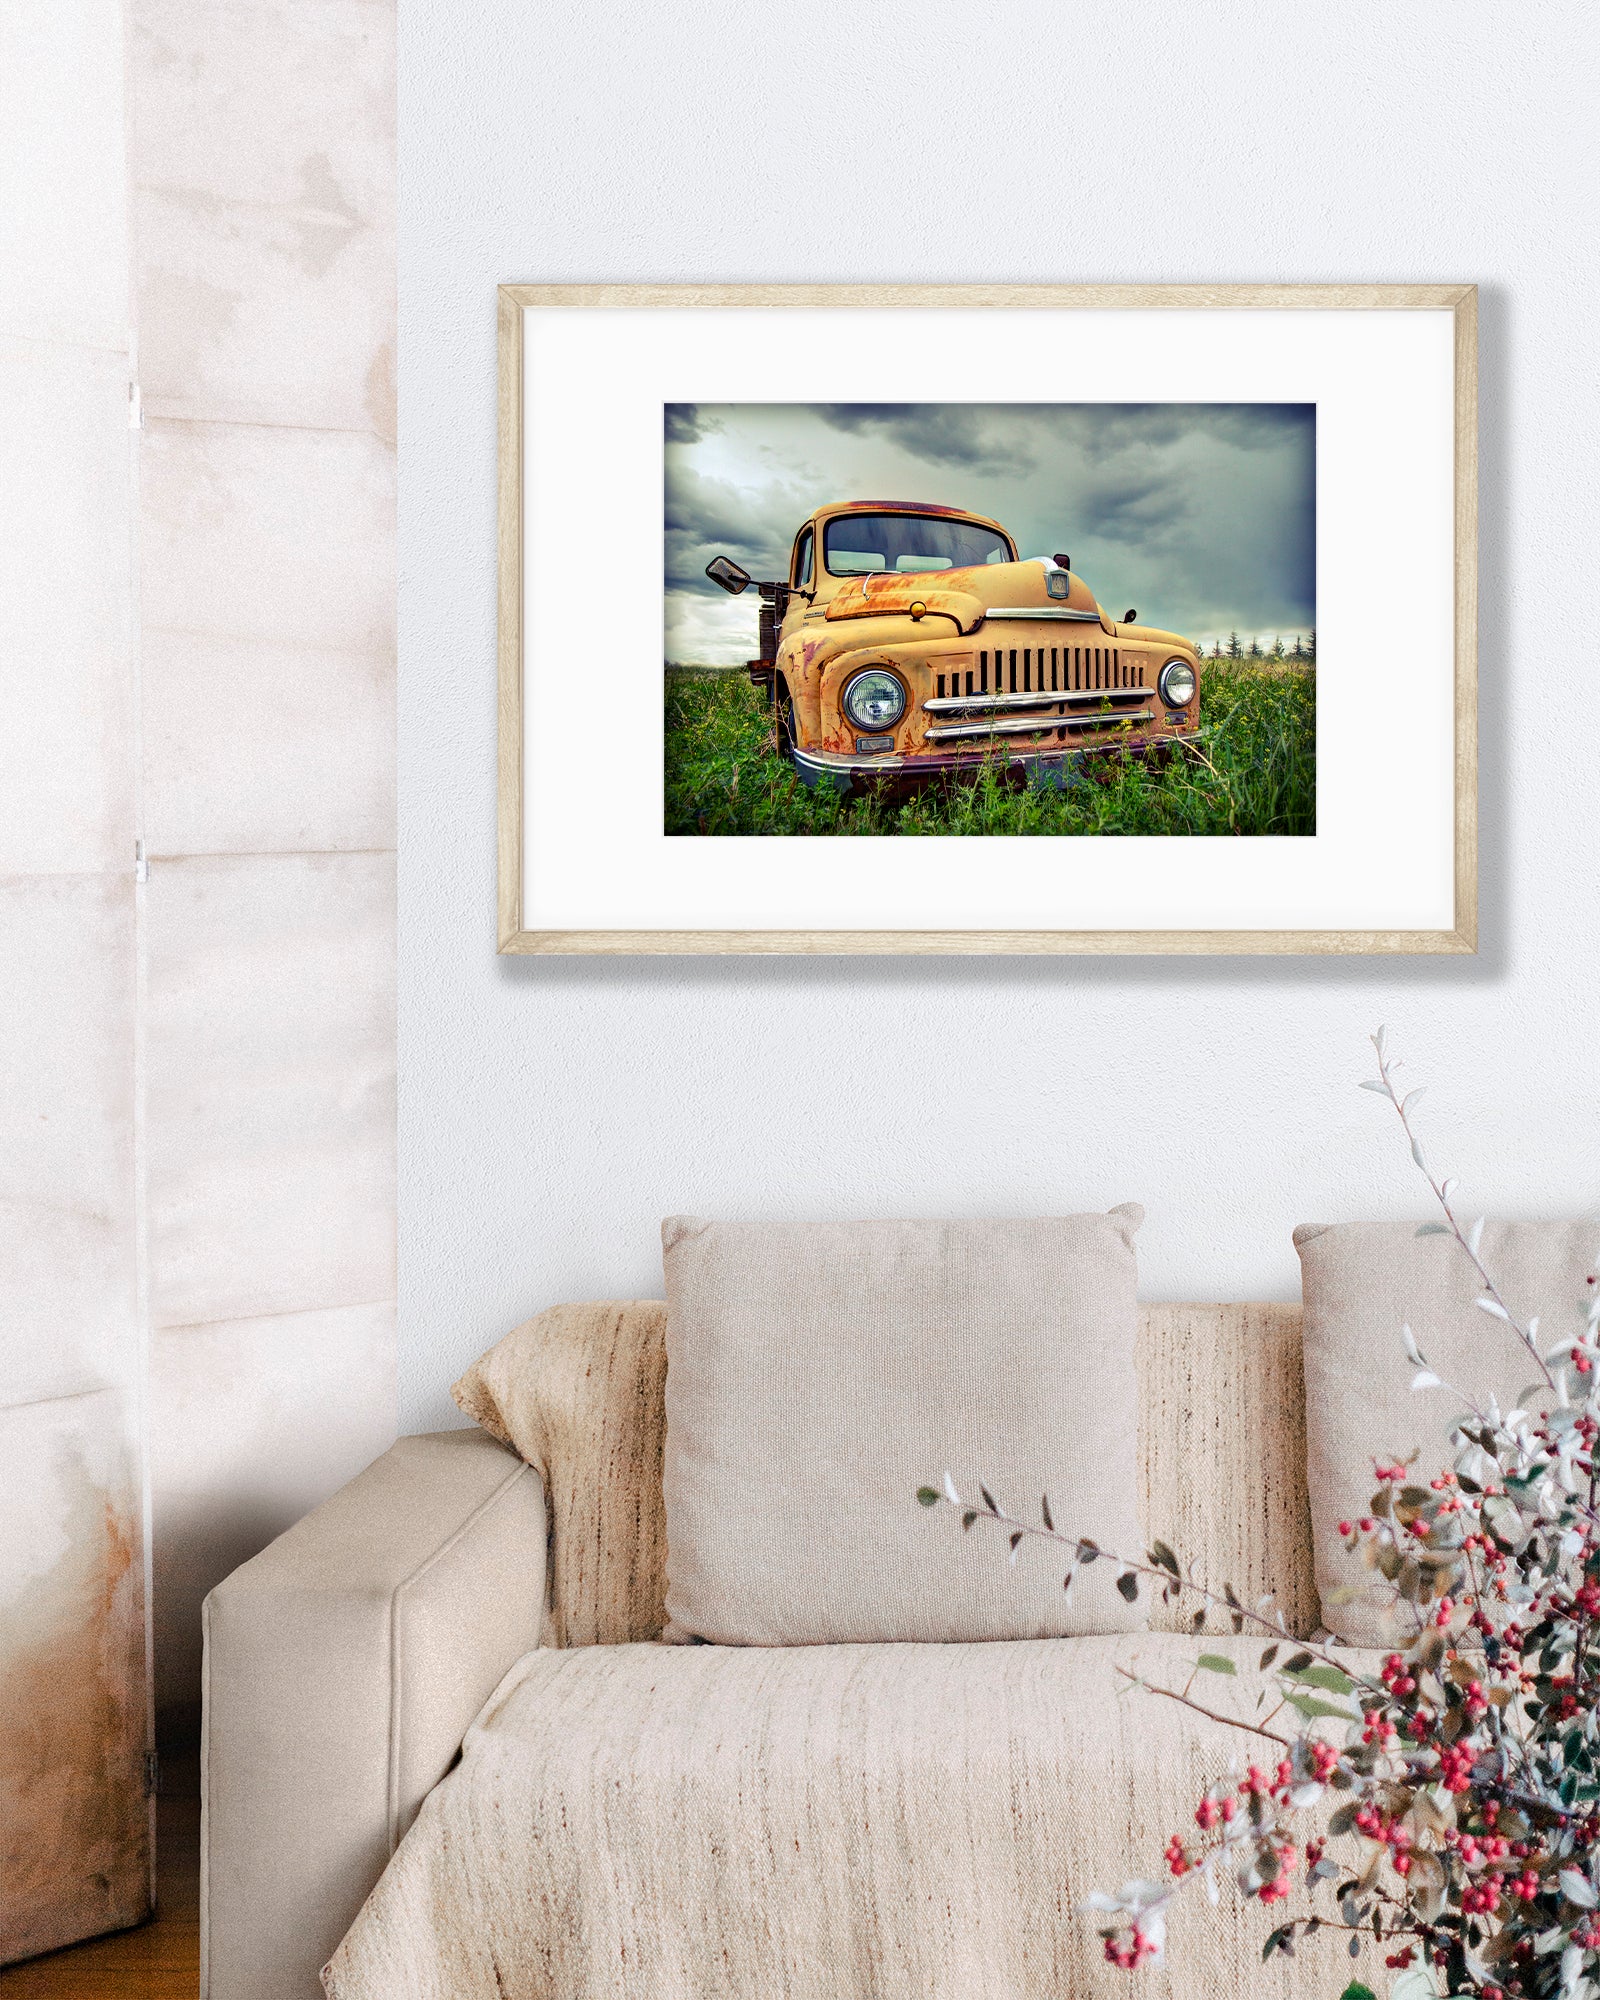 Big Matted Art Print of Rusty International Truck in Field Ready to Frame